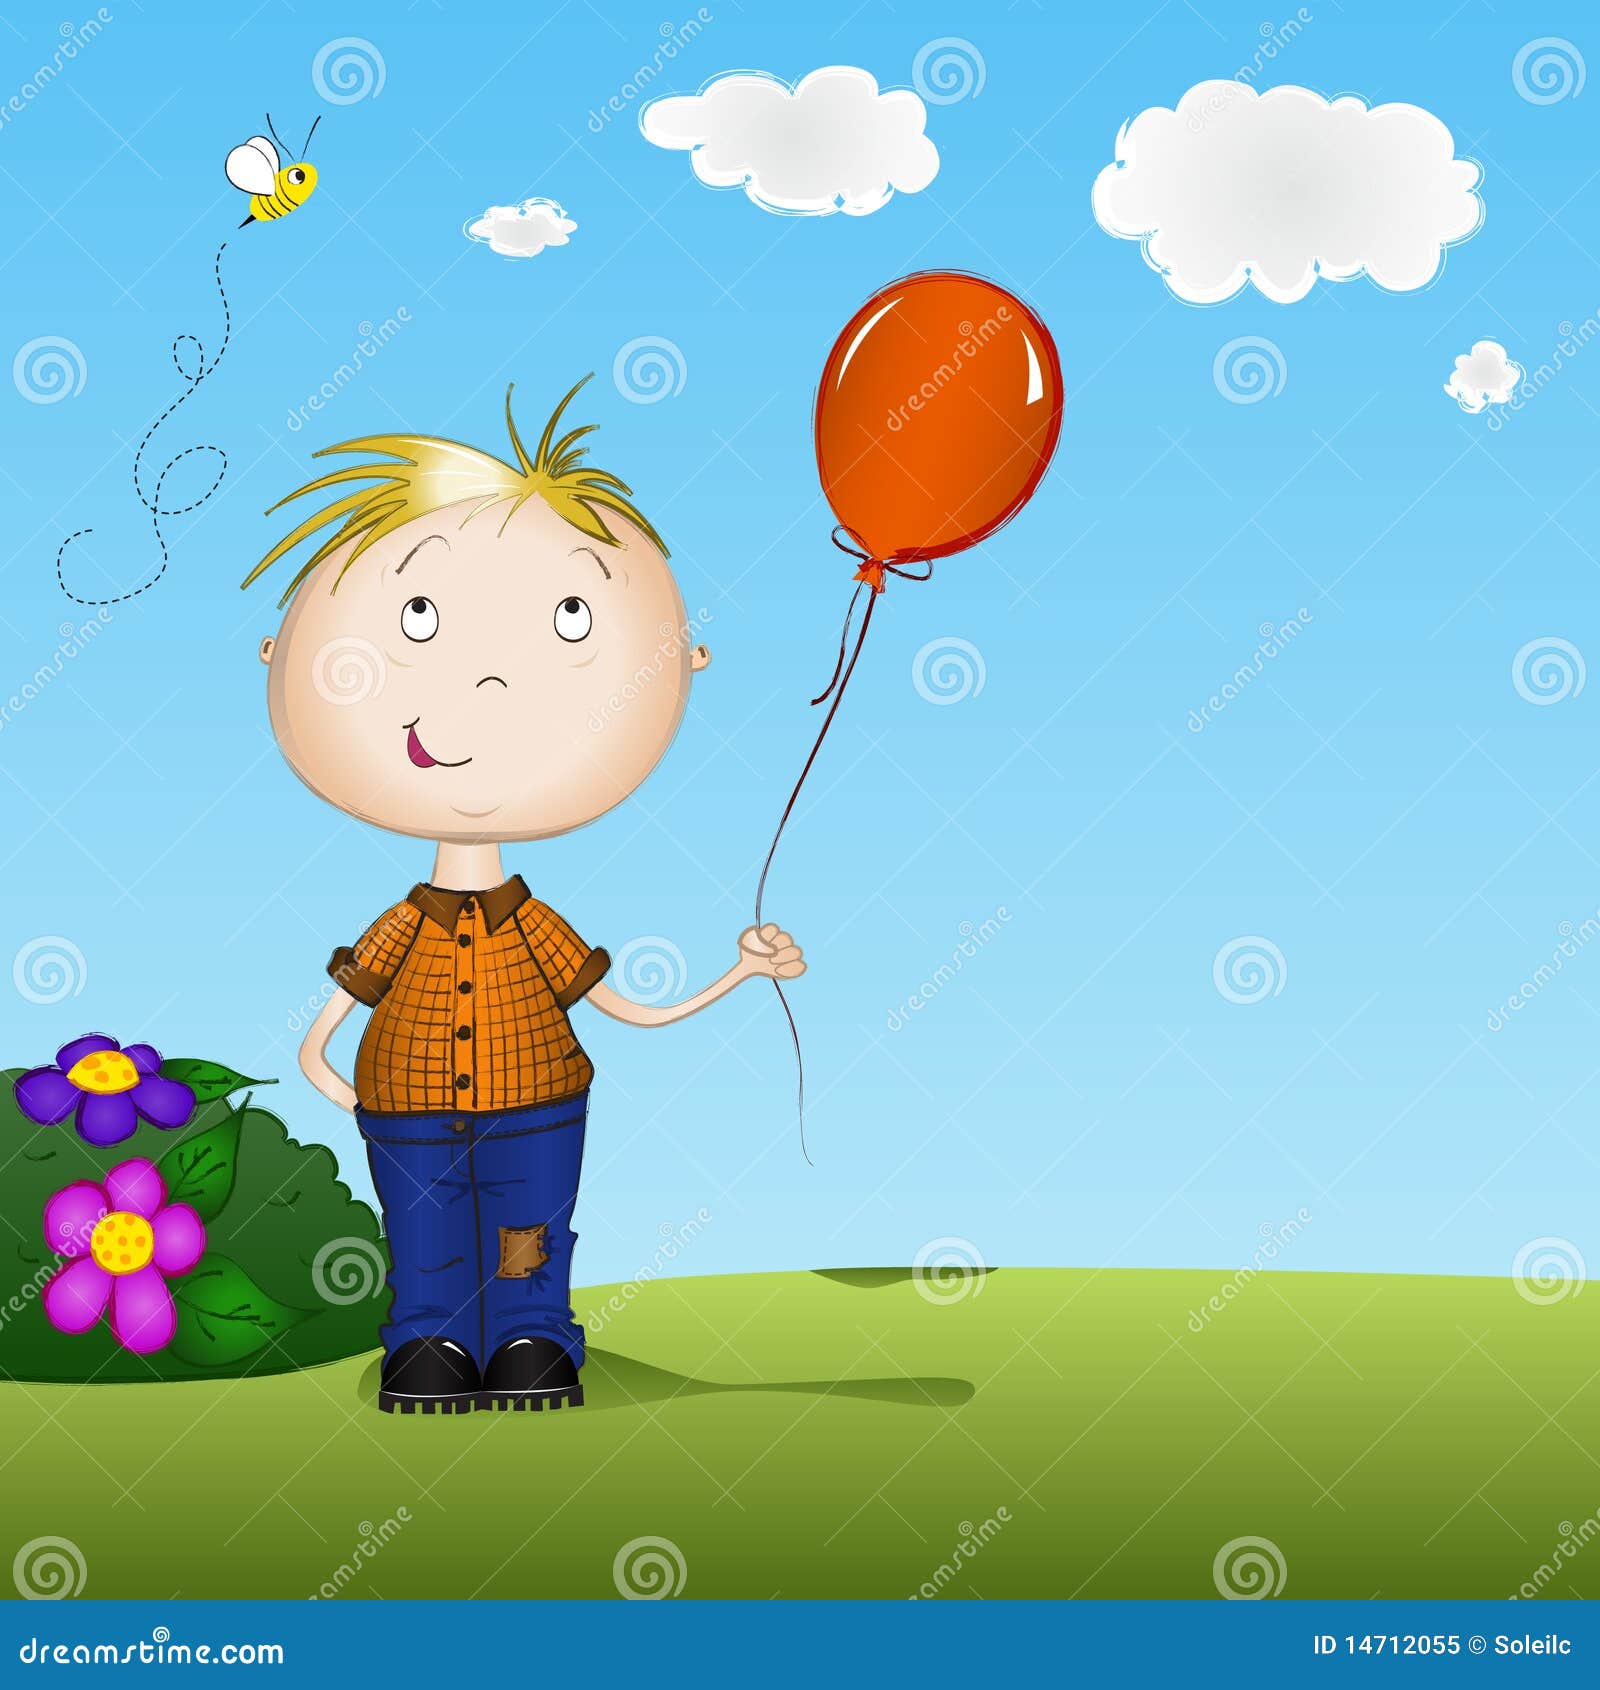 Child With Balloons photos, royalty-free images, graphics, vectors ...